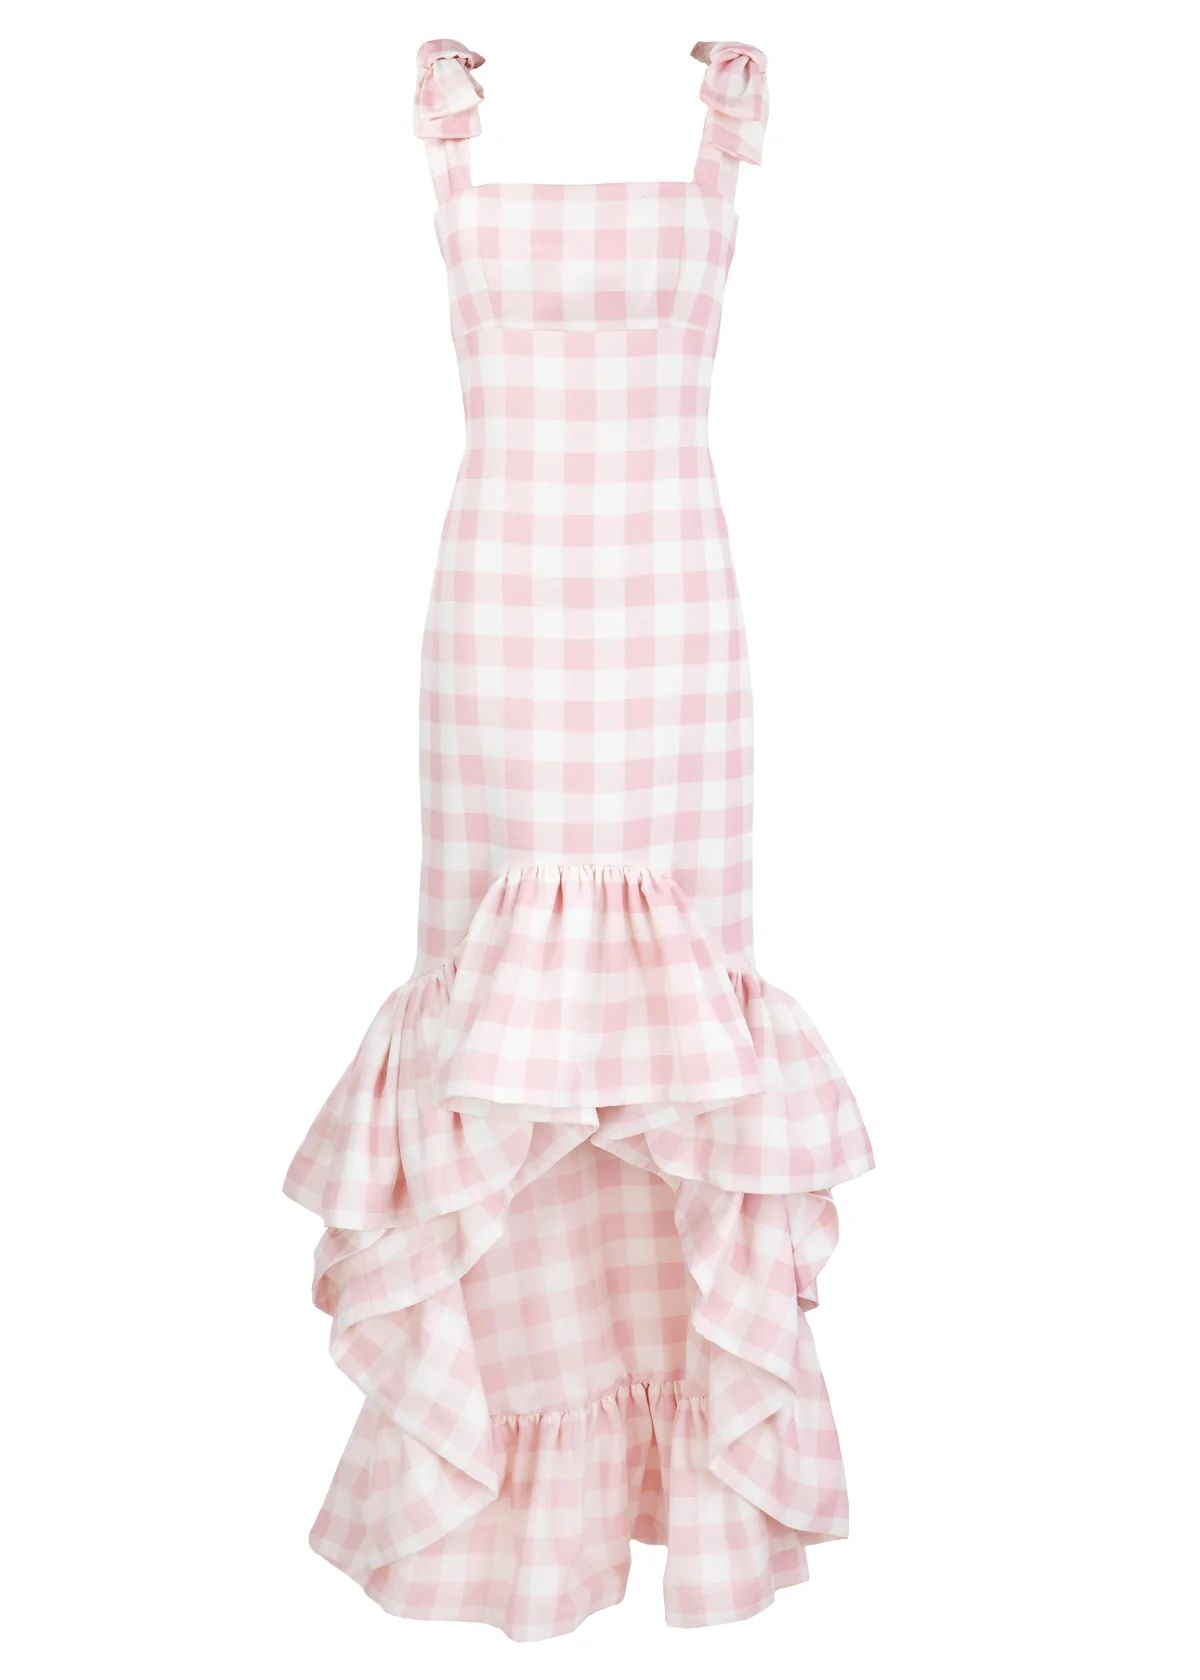 La Palma Dress in Pink Gingham | Over The Moon